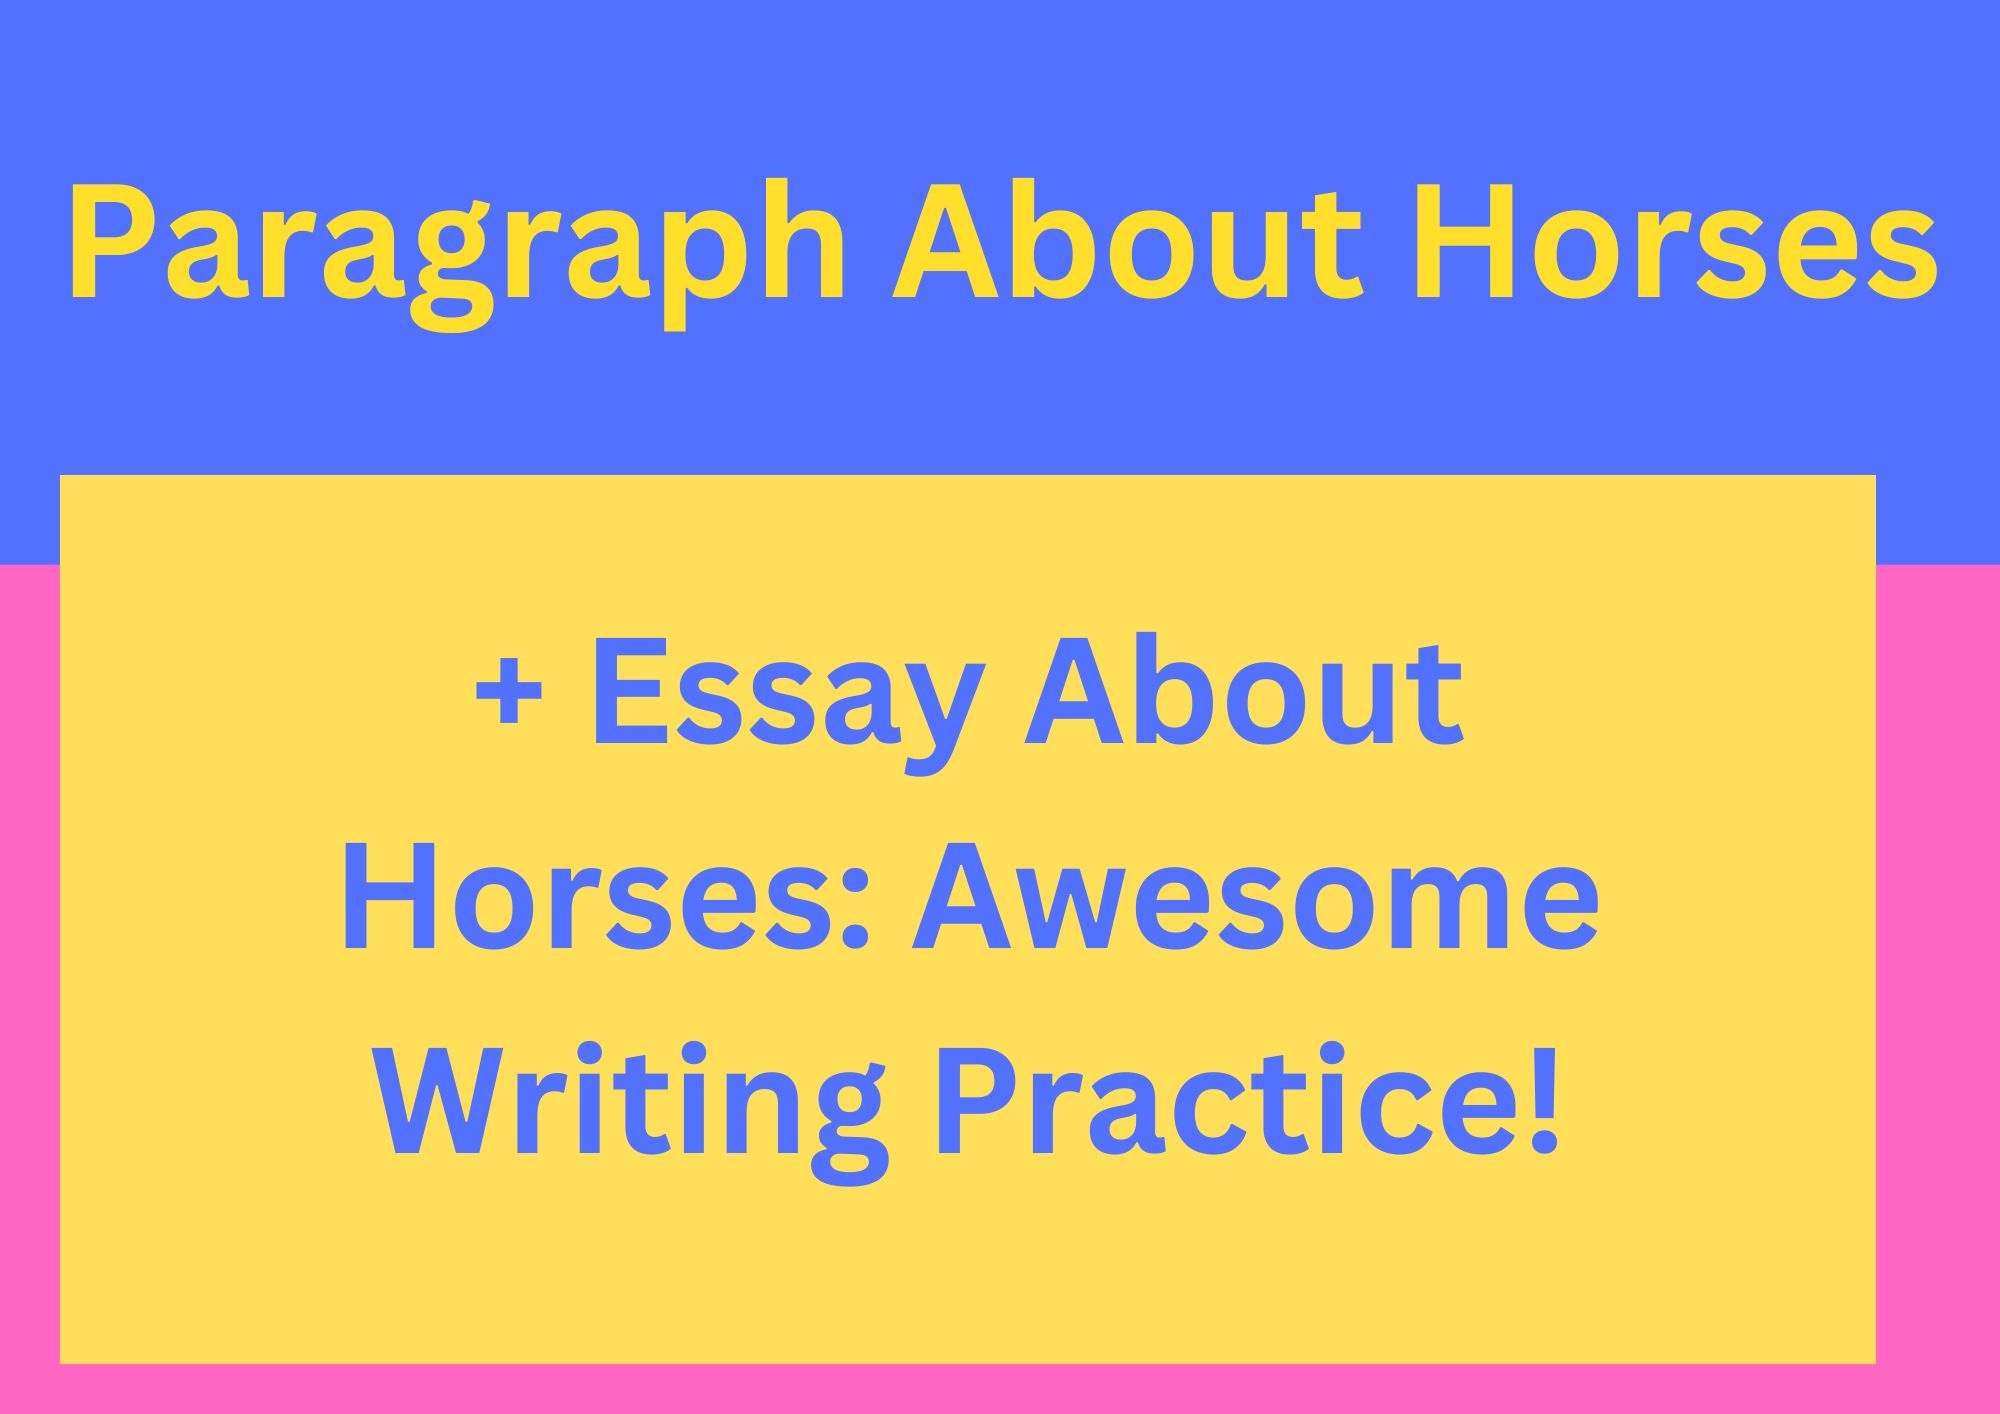 a good title for an essay about horses